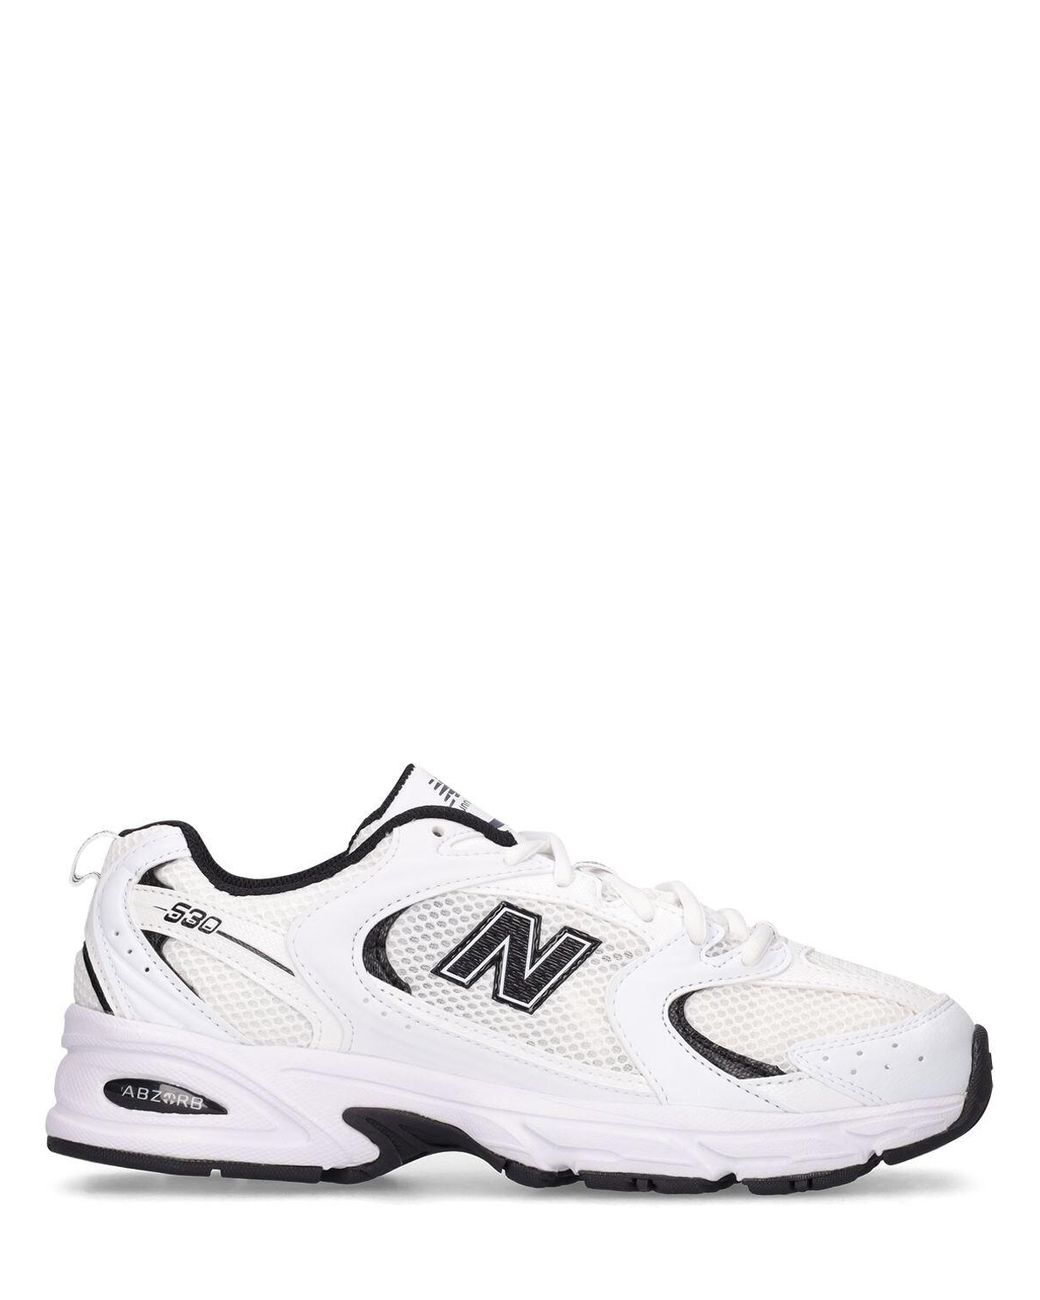 New Balance 530 Sneakers in White/Blue (White) | Lyst UK